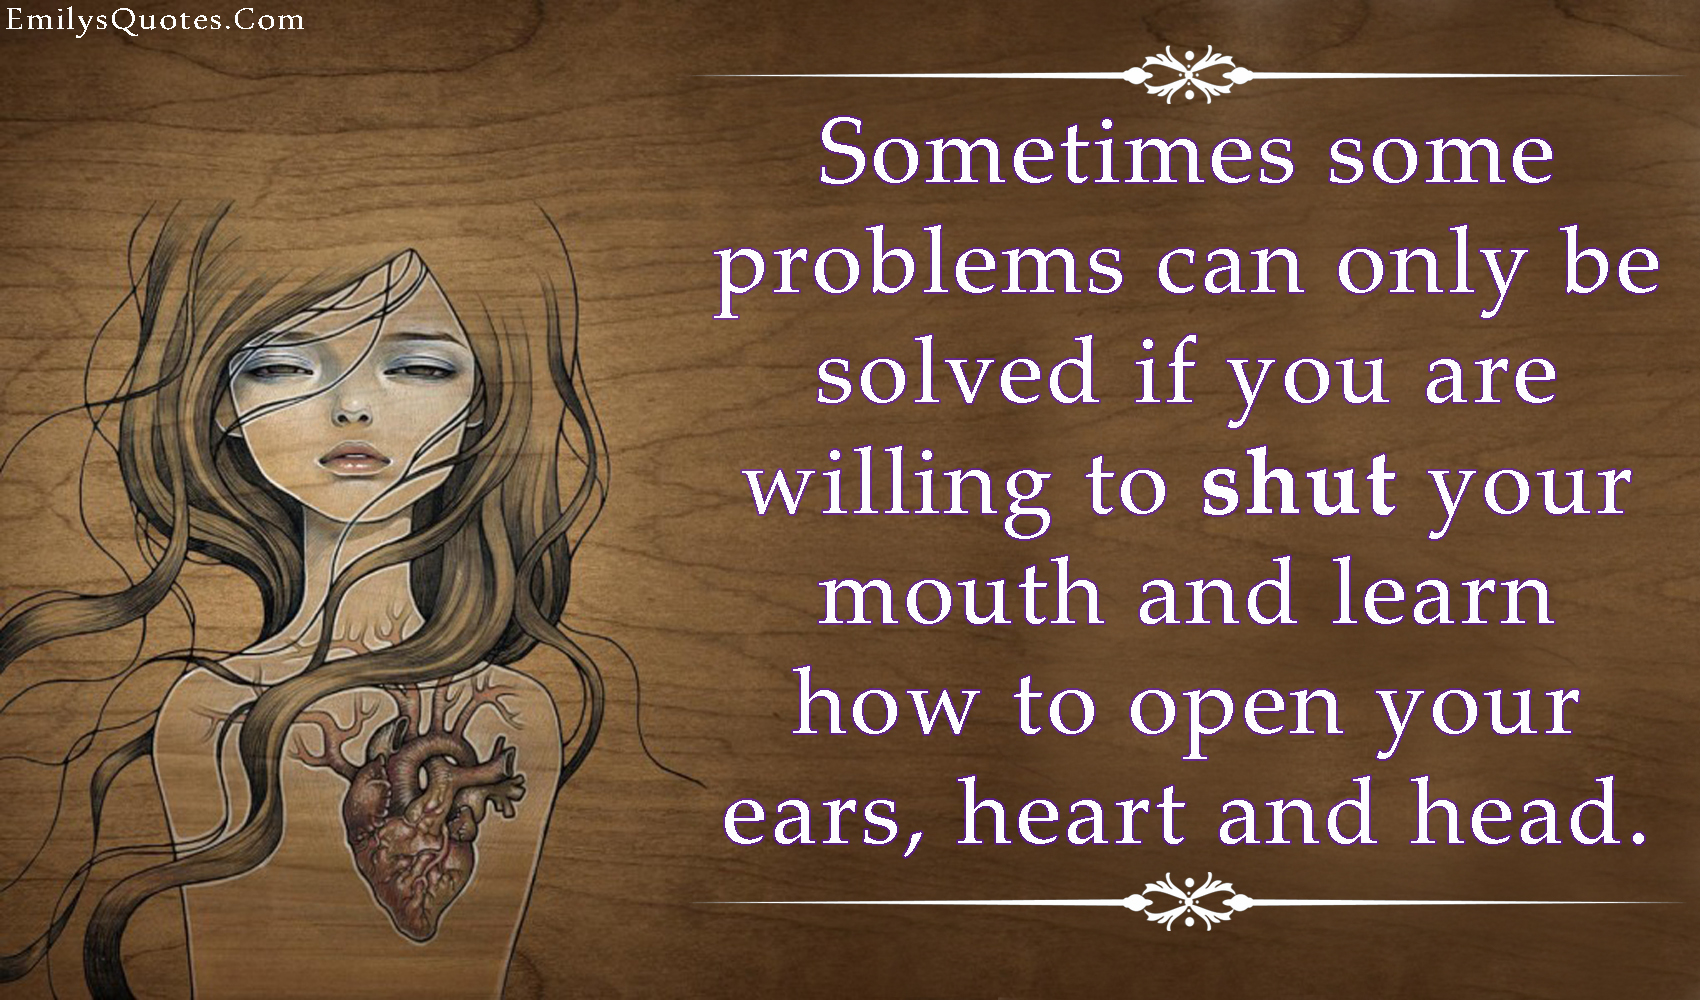 Sometimes some problems can only be solved if you are willing to shut